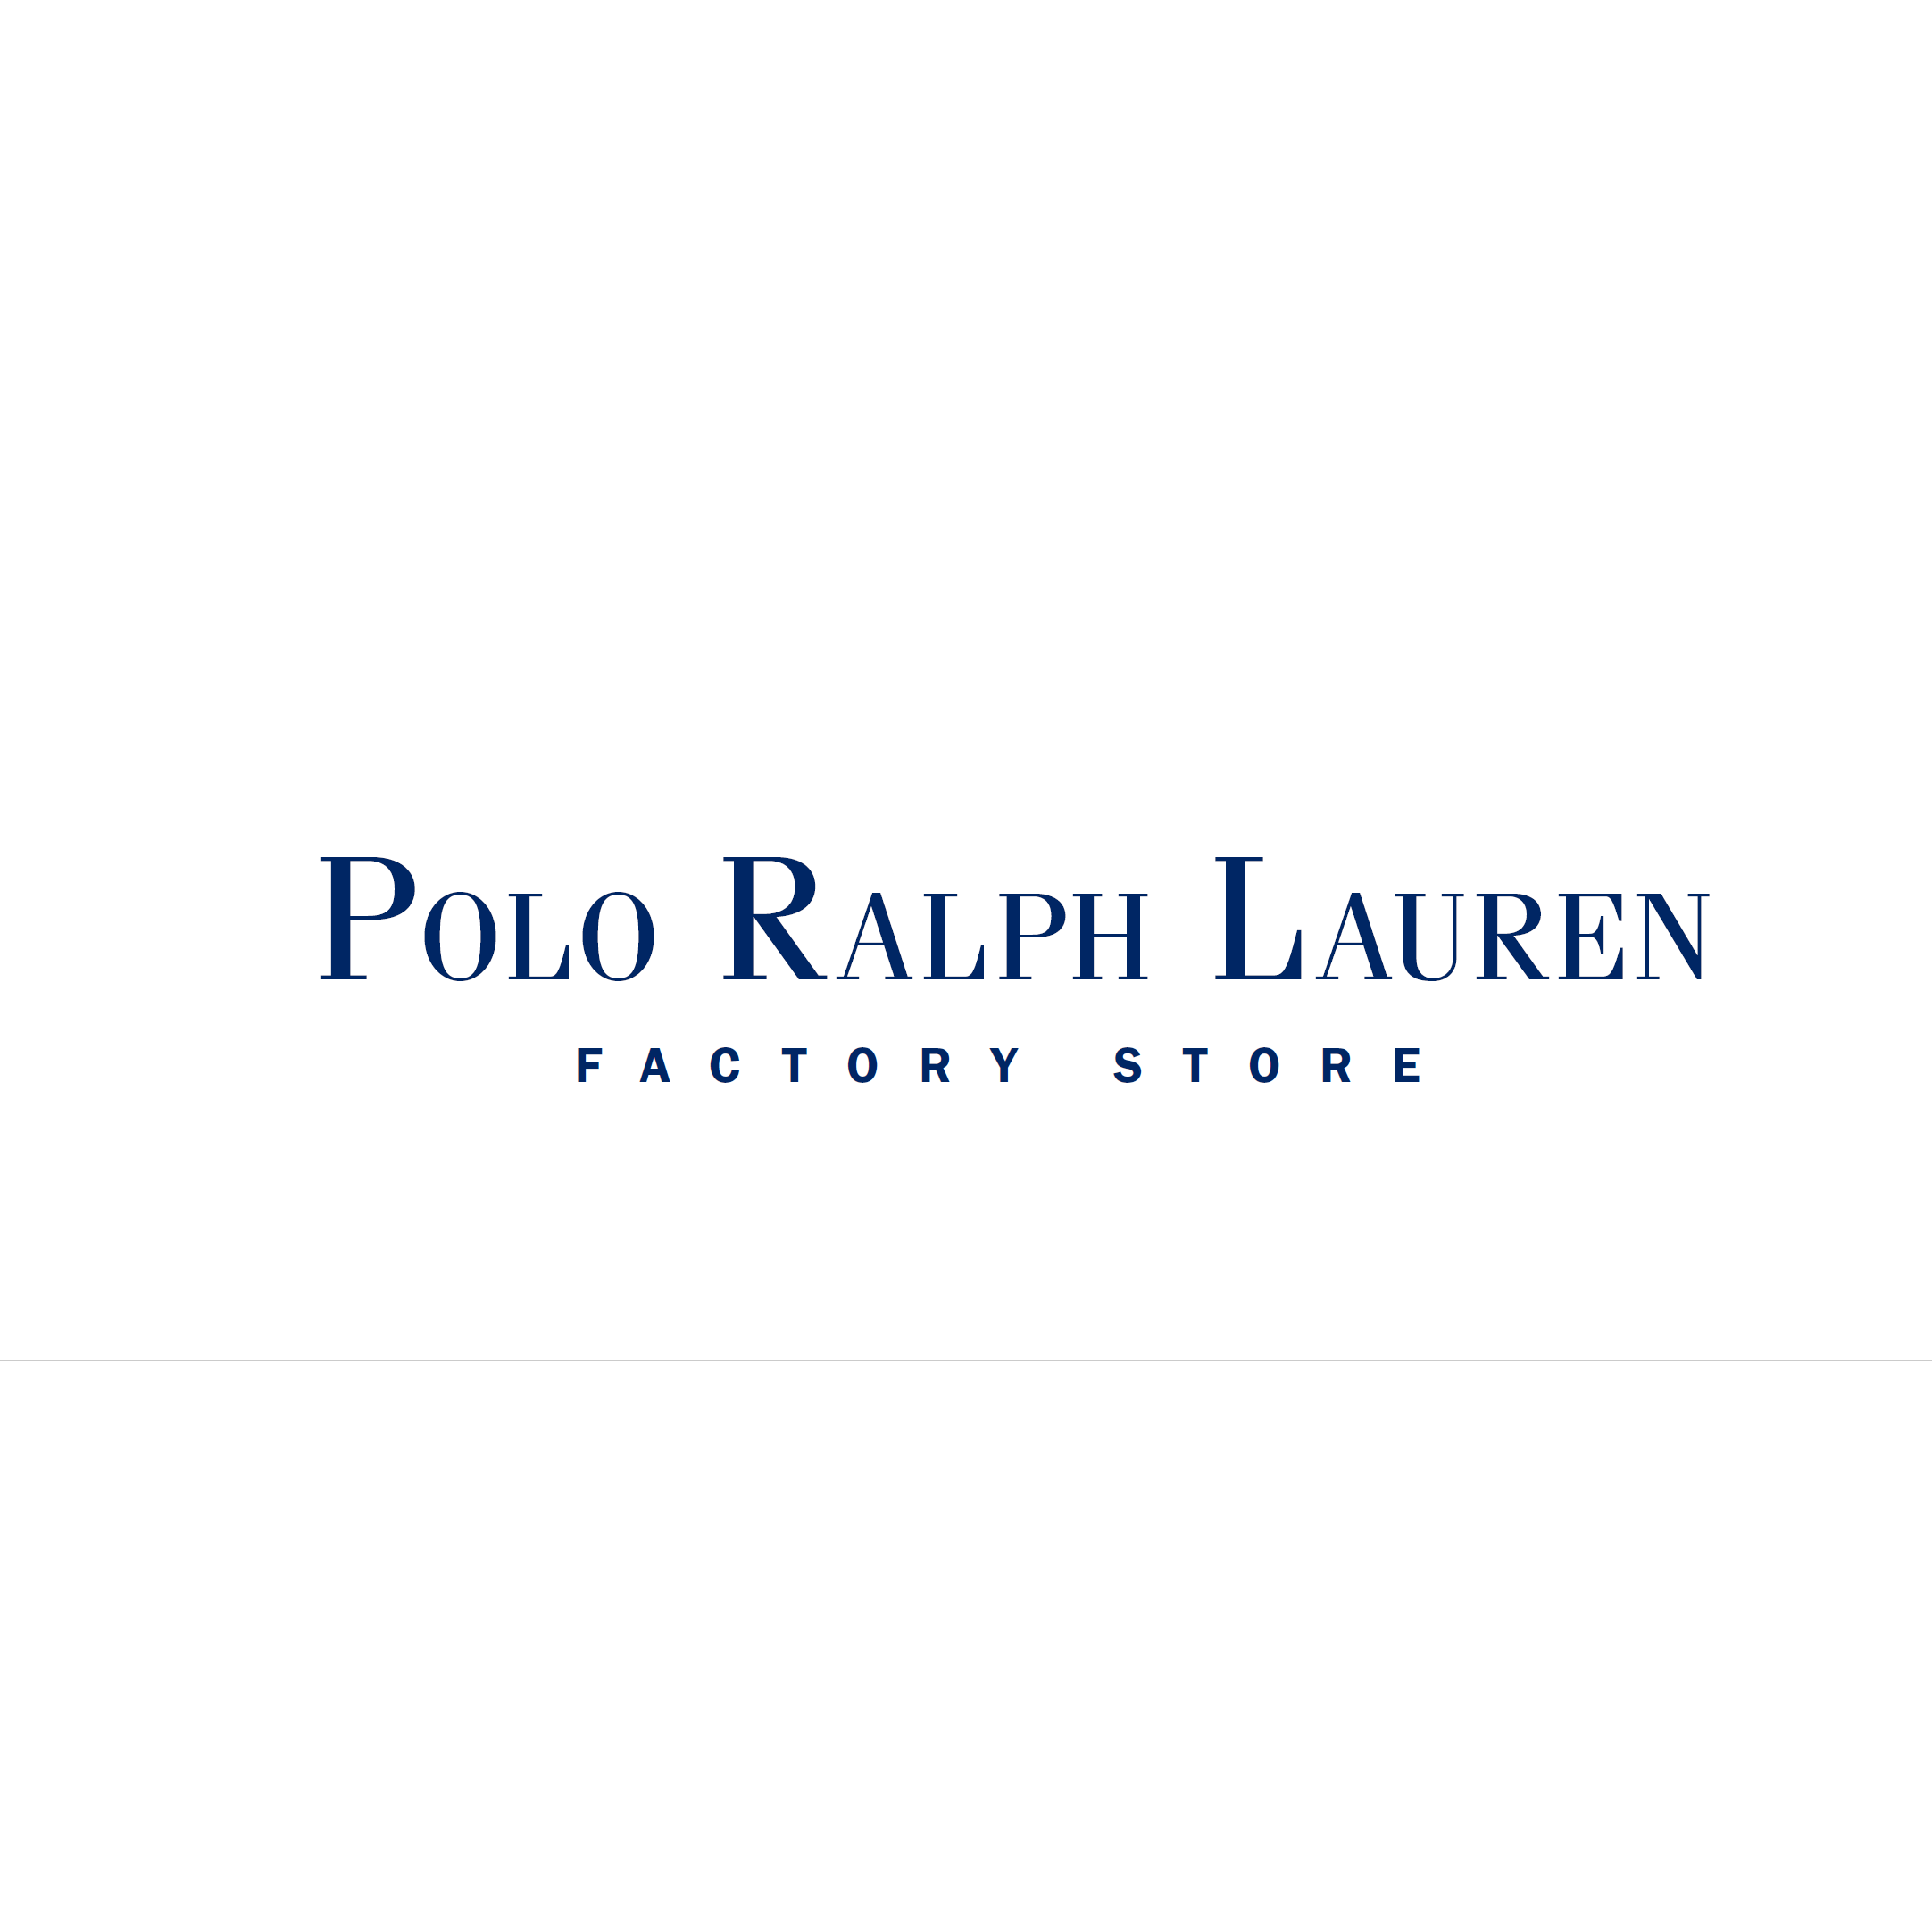 Polo Ralph Lauren Big and Tall Factory Store Logo